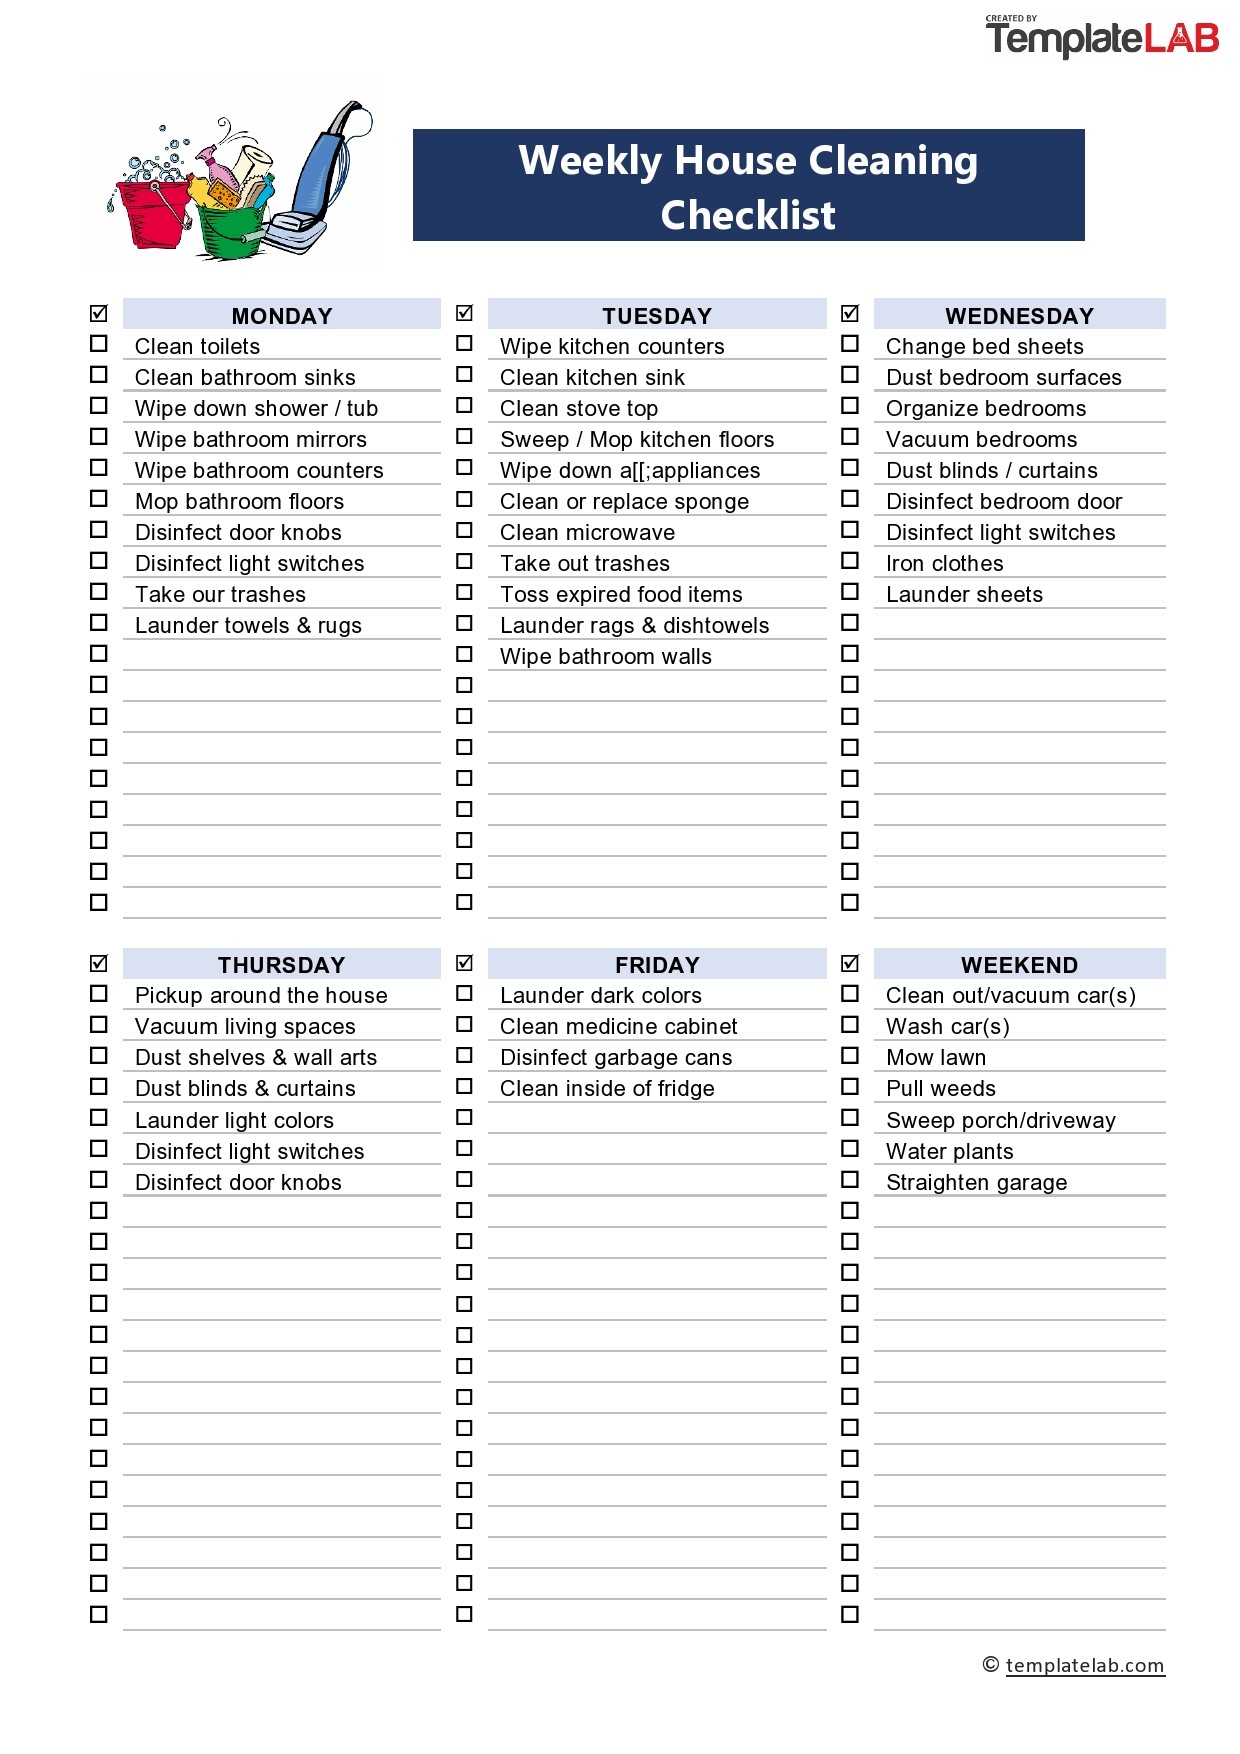 Housecleaning Itemized Checklist Organizer By Room For Maid Services 